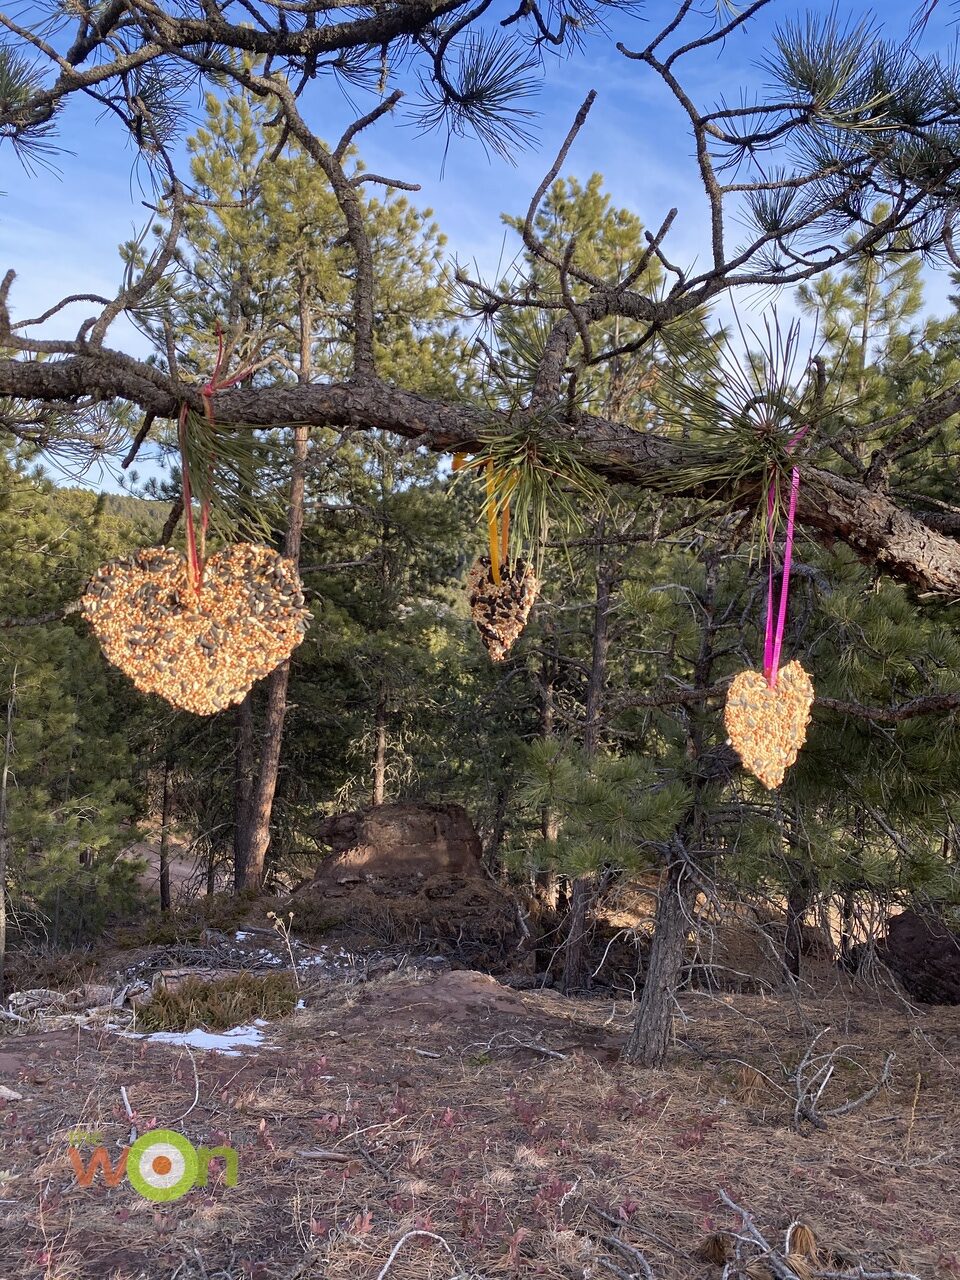 birdseed hearts hanging on a tree branch